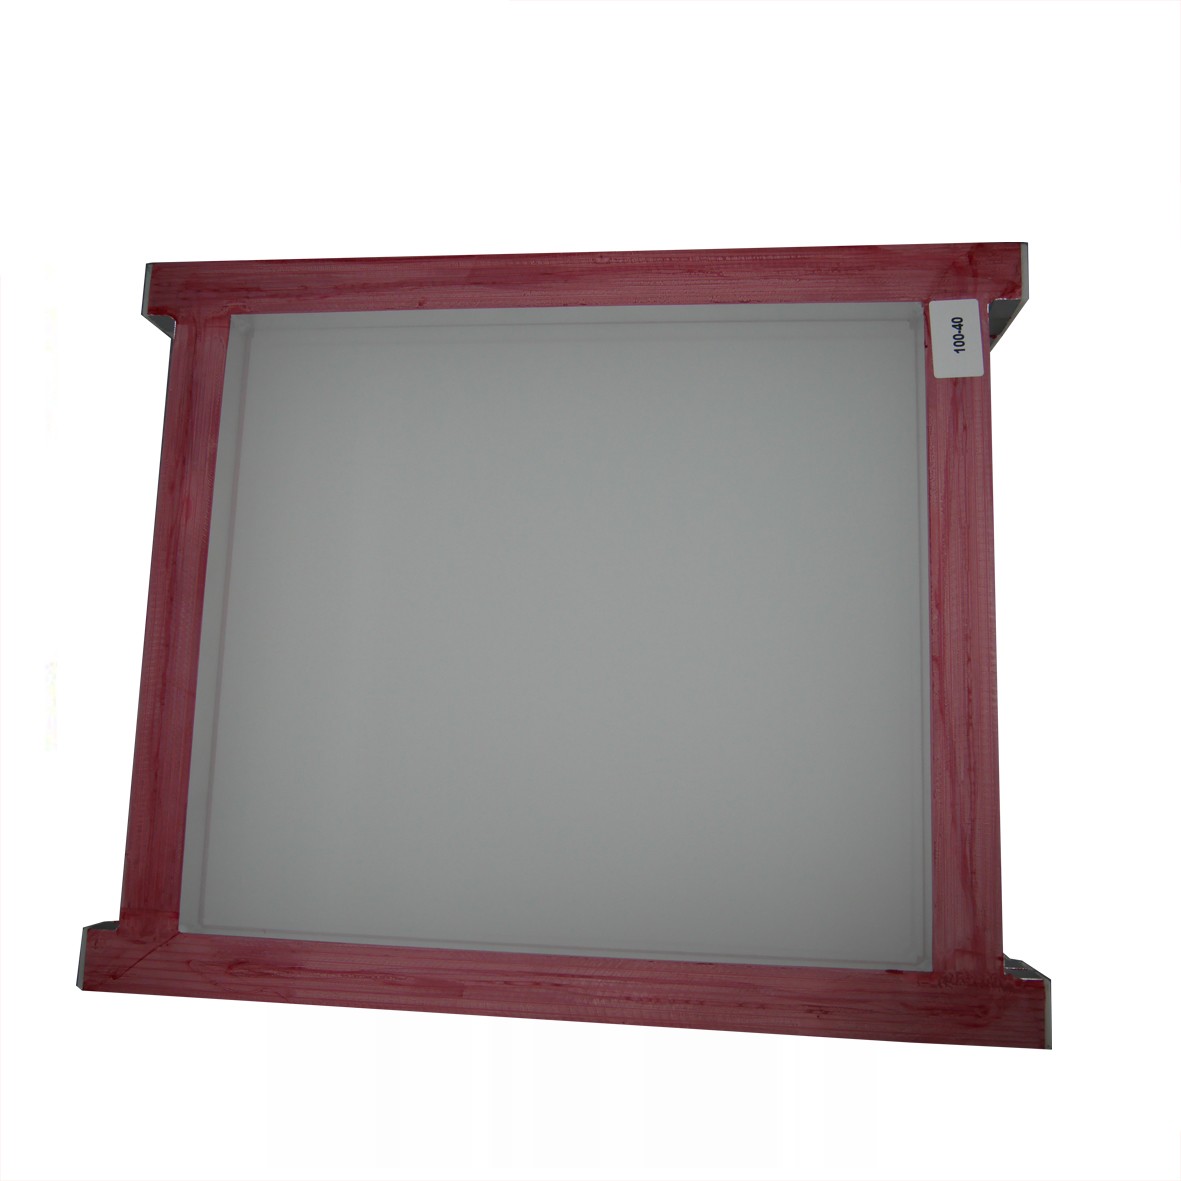 18x24inch line table printing frame